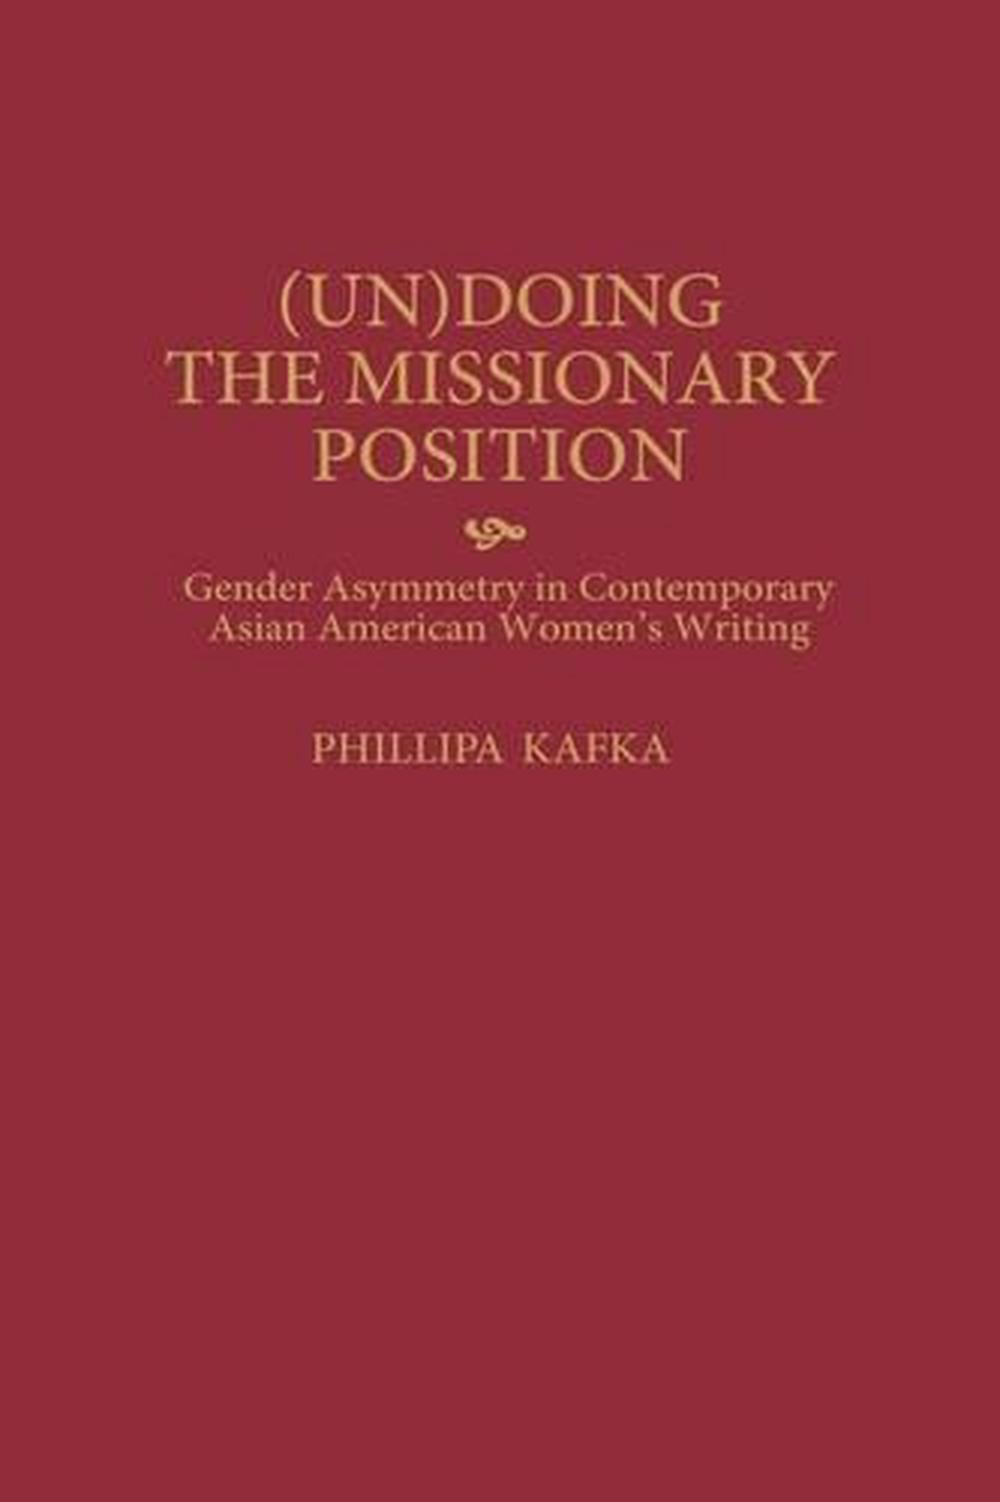 (Un)Doing the Missionary Position: Gender Asymmetry in Contemporary ...